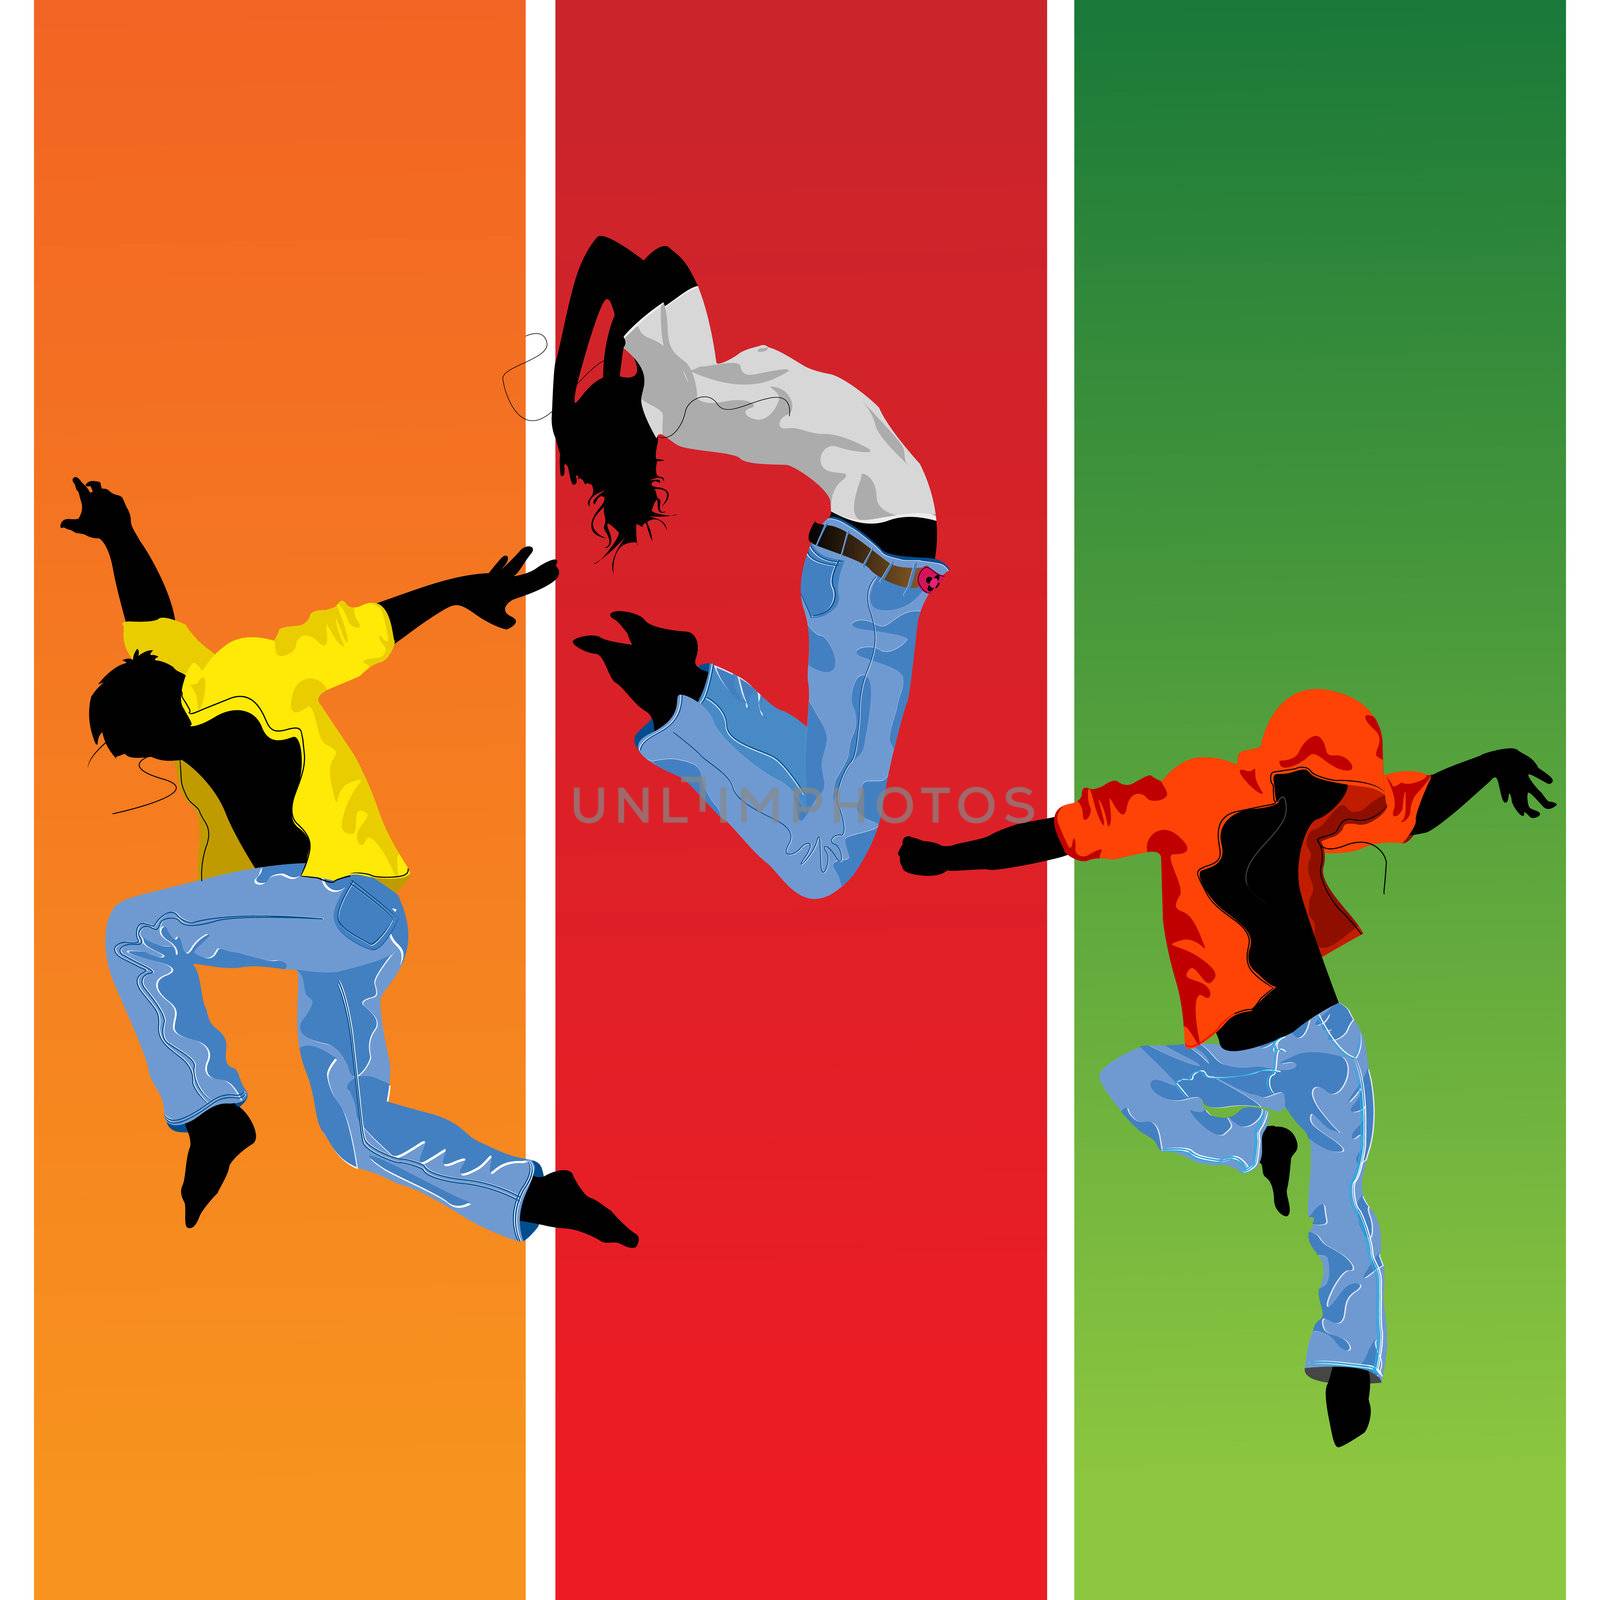 Jumping silhouettes by Lirch